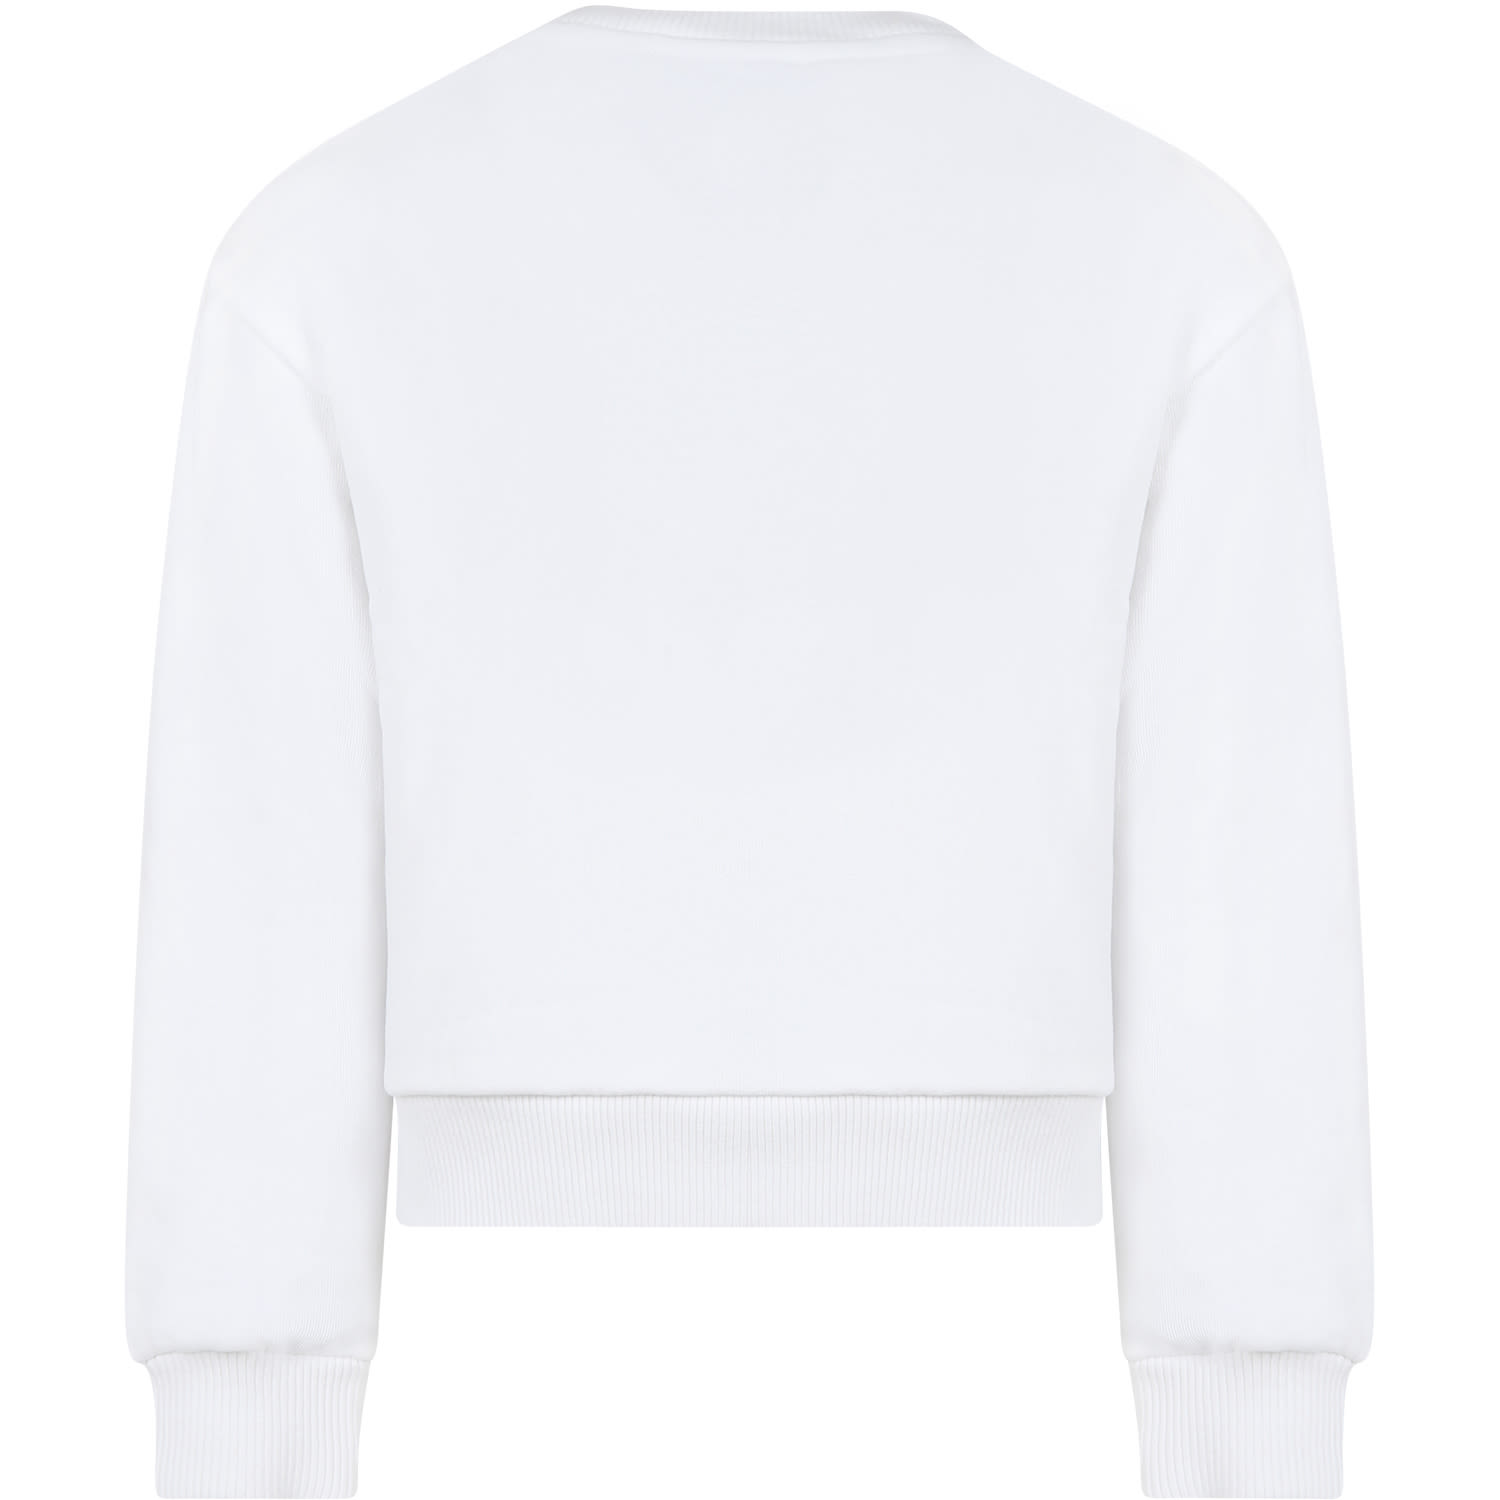 Shop Dolce & Gabbana Whit Sweatshirt For Kids With Iconic Monogram In Bianco